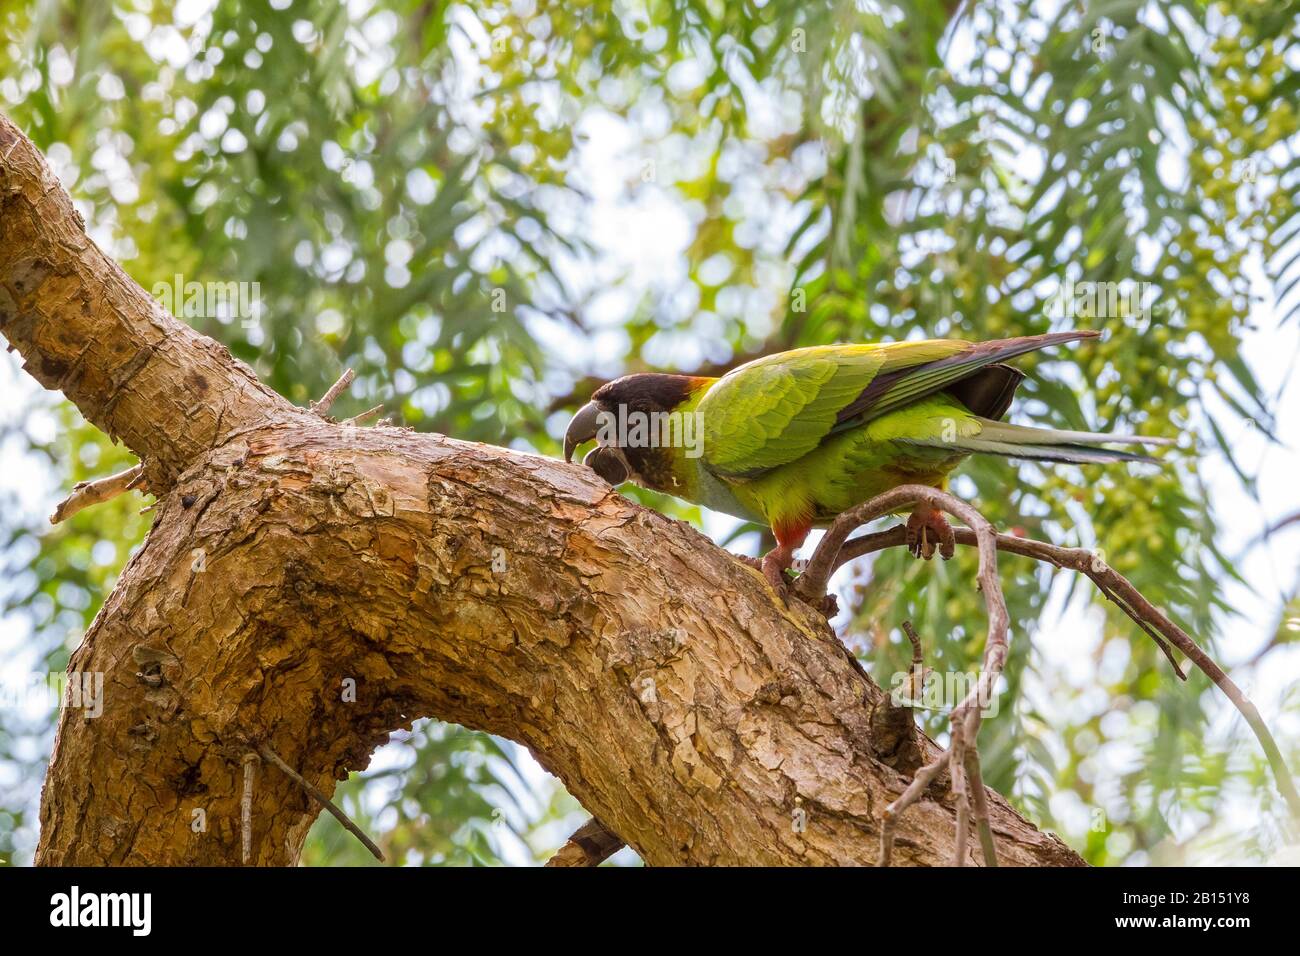 Anday Conure (Aratinga nenday, Nandayus nenday), perches on a branch and nibbling at the Bark, side View, Kanarische Inseln, Teneras Stockfoto